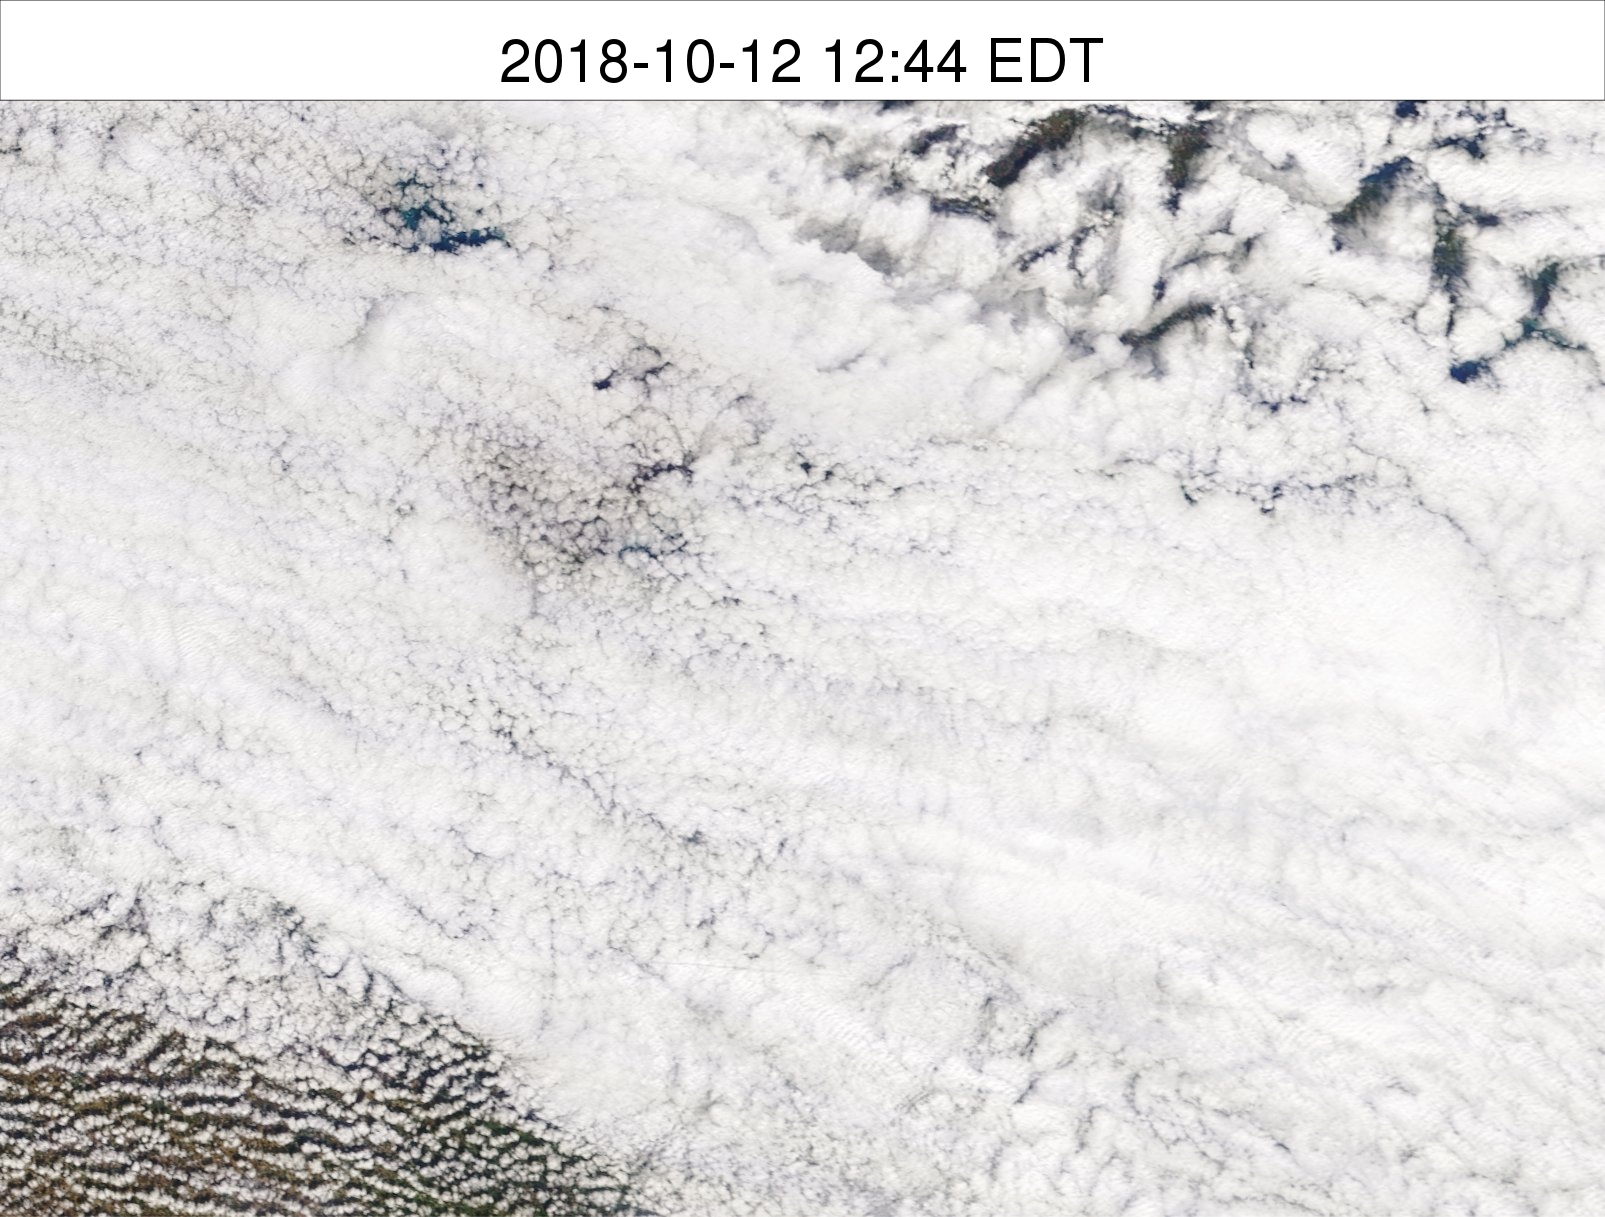 Latest relatively cloud-free MODIS satellite image of Lake Erie. For additional satellite imagery of Lake Erie, visit the NOAA Great Lakes CoastWatch webpage.